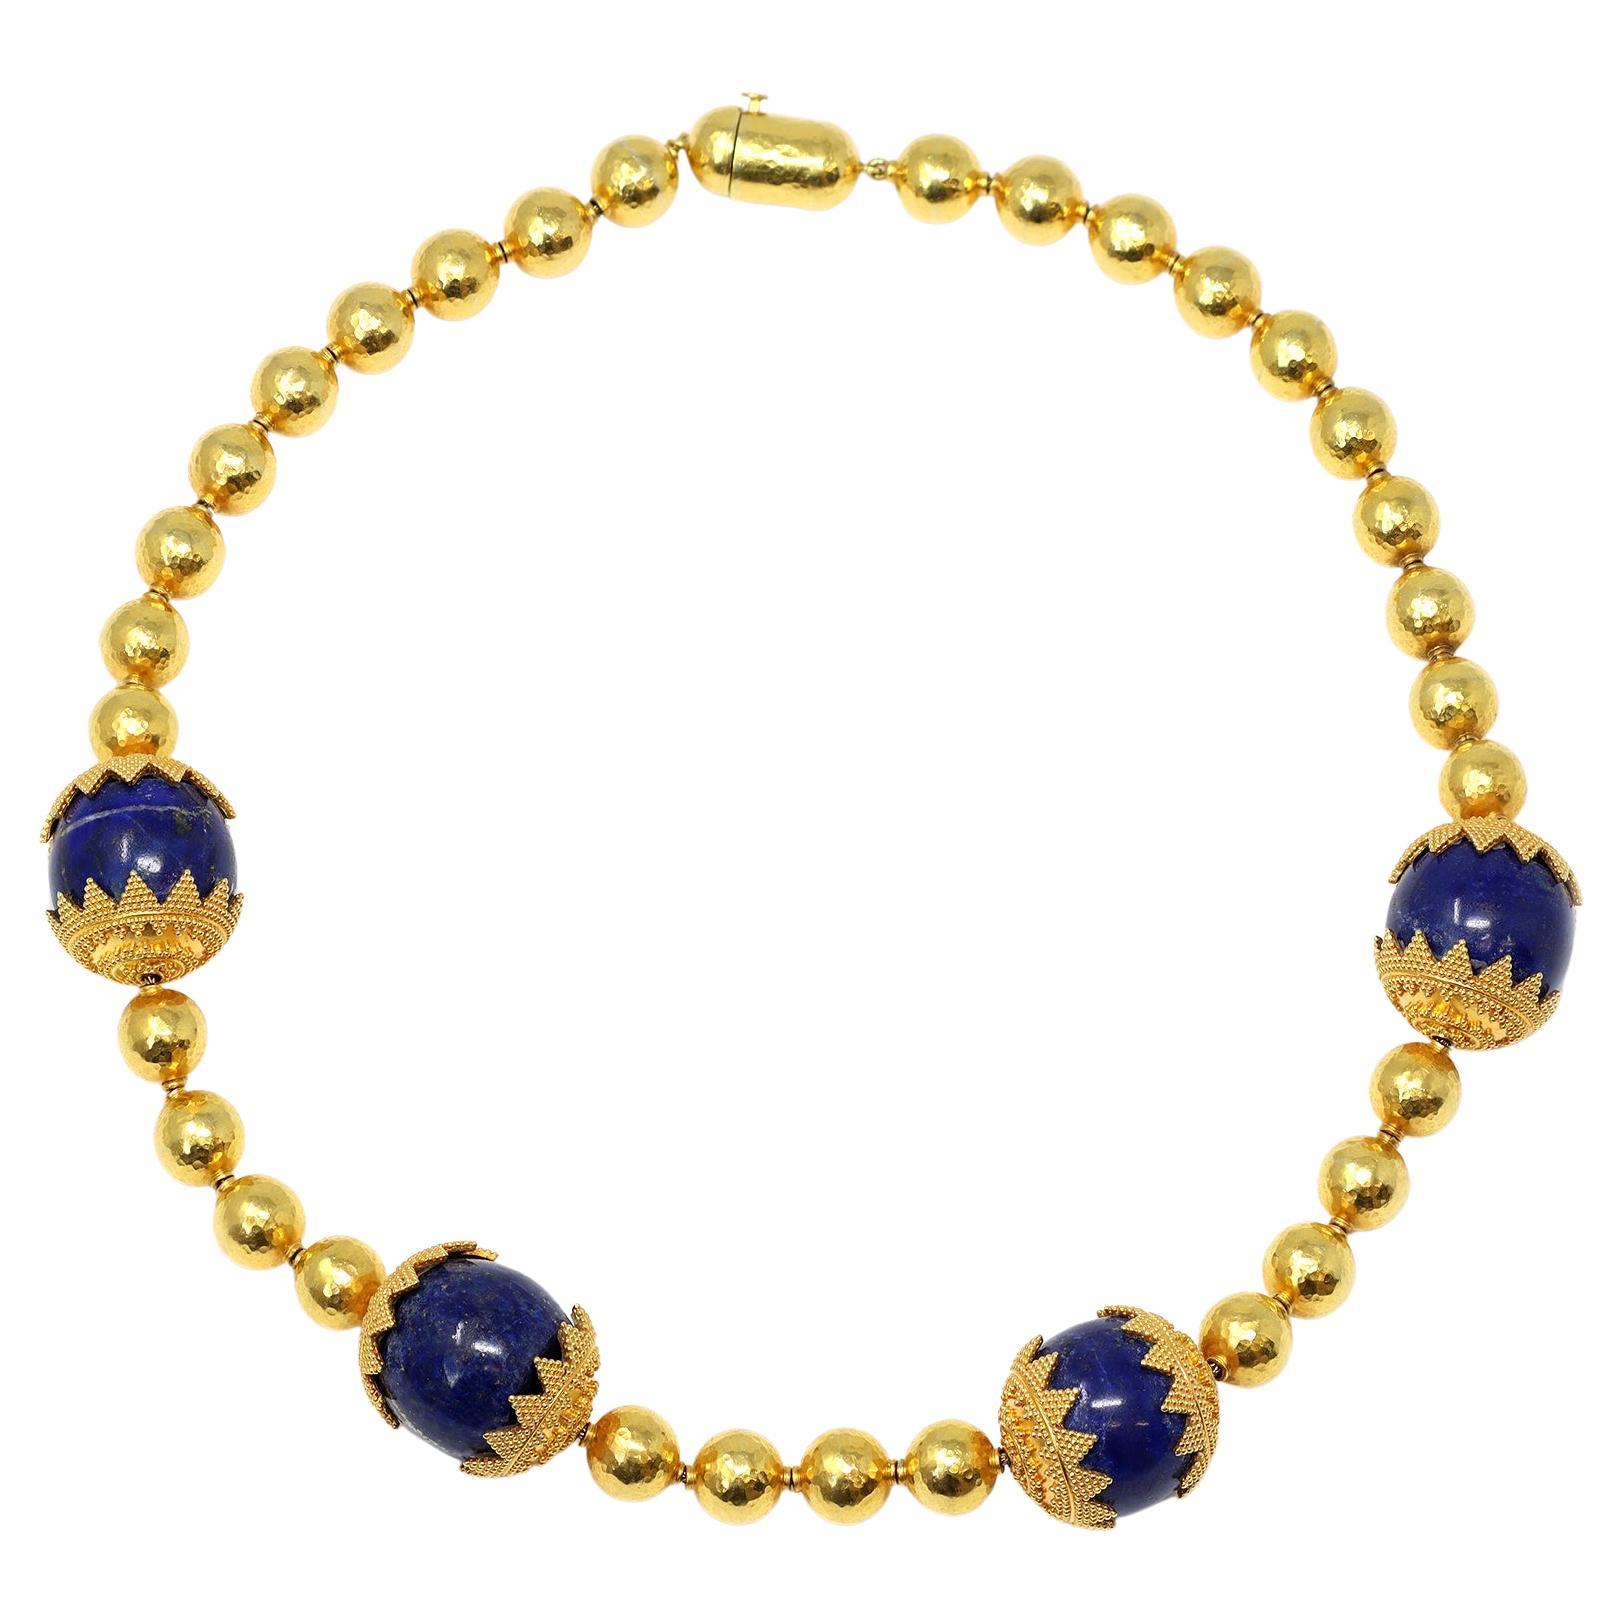 High Karat Gold Necklace with Lapis Lazuli Beads CA 1970 For Sale